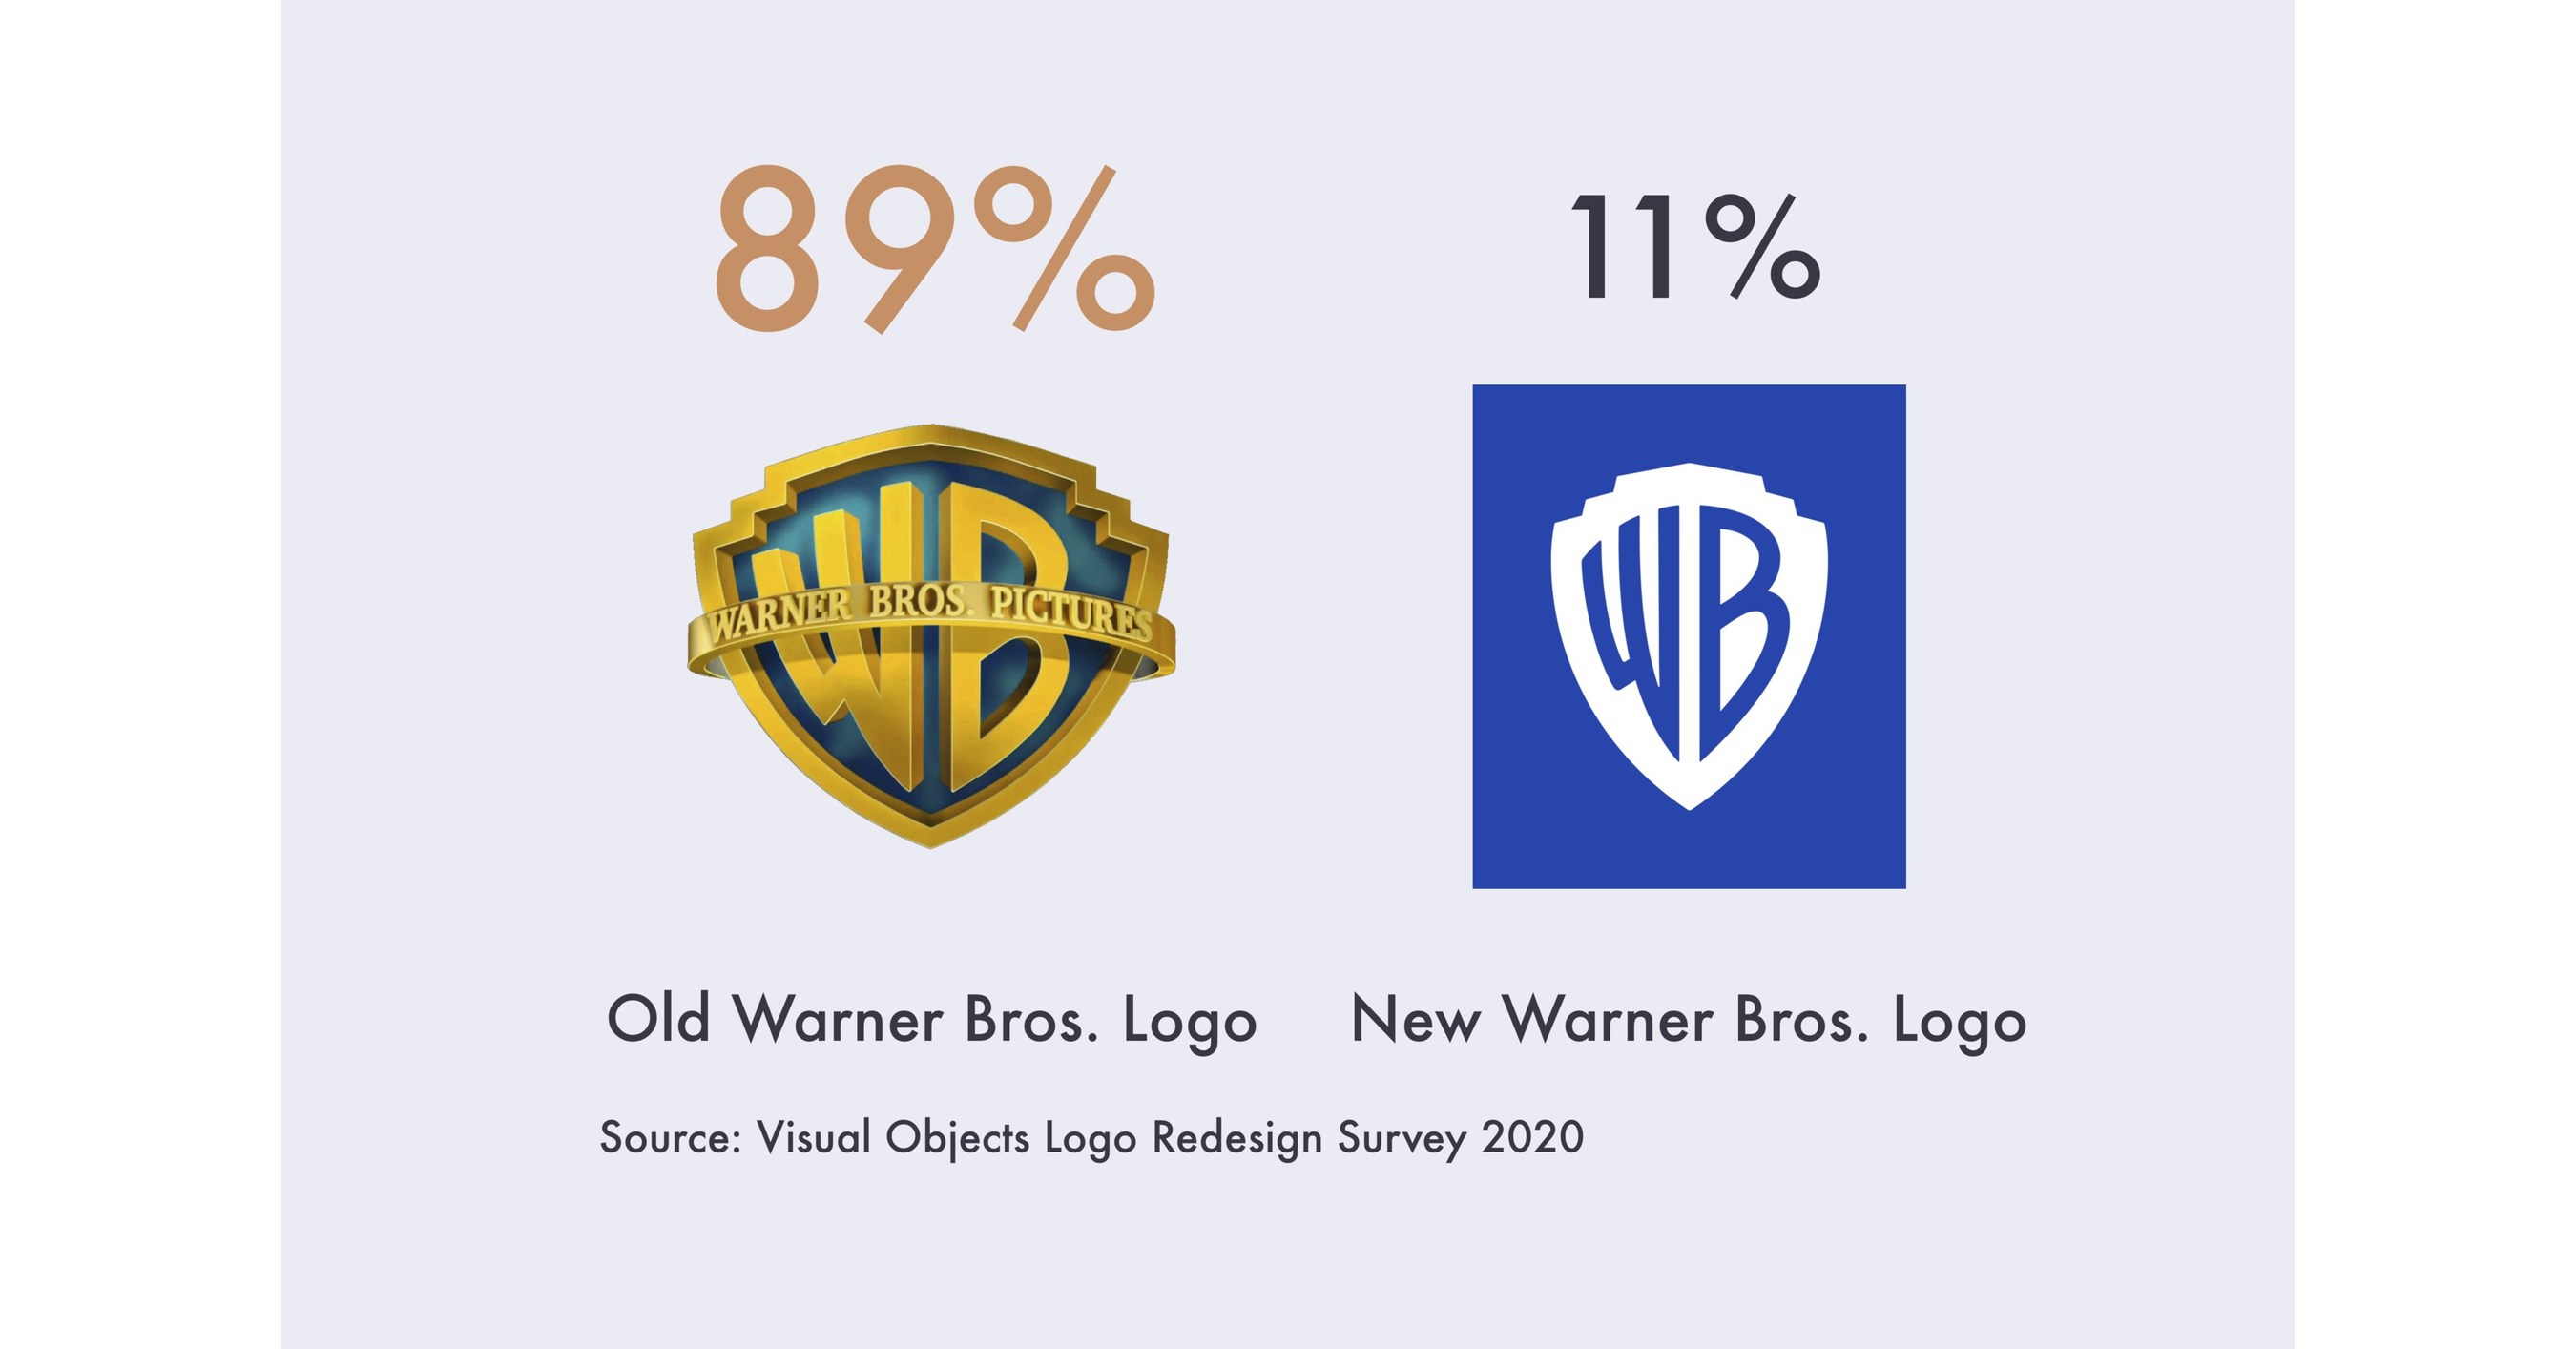 Just 11% of People Prefer the New Warner Bros. Logo, Showing the Impact of  Nostalgia for Iconic Brands